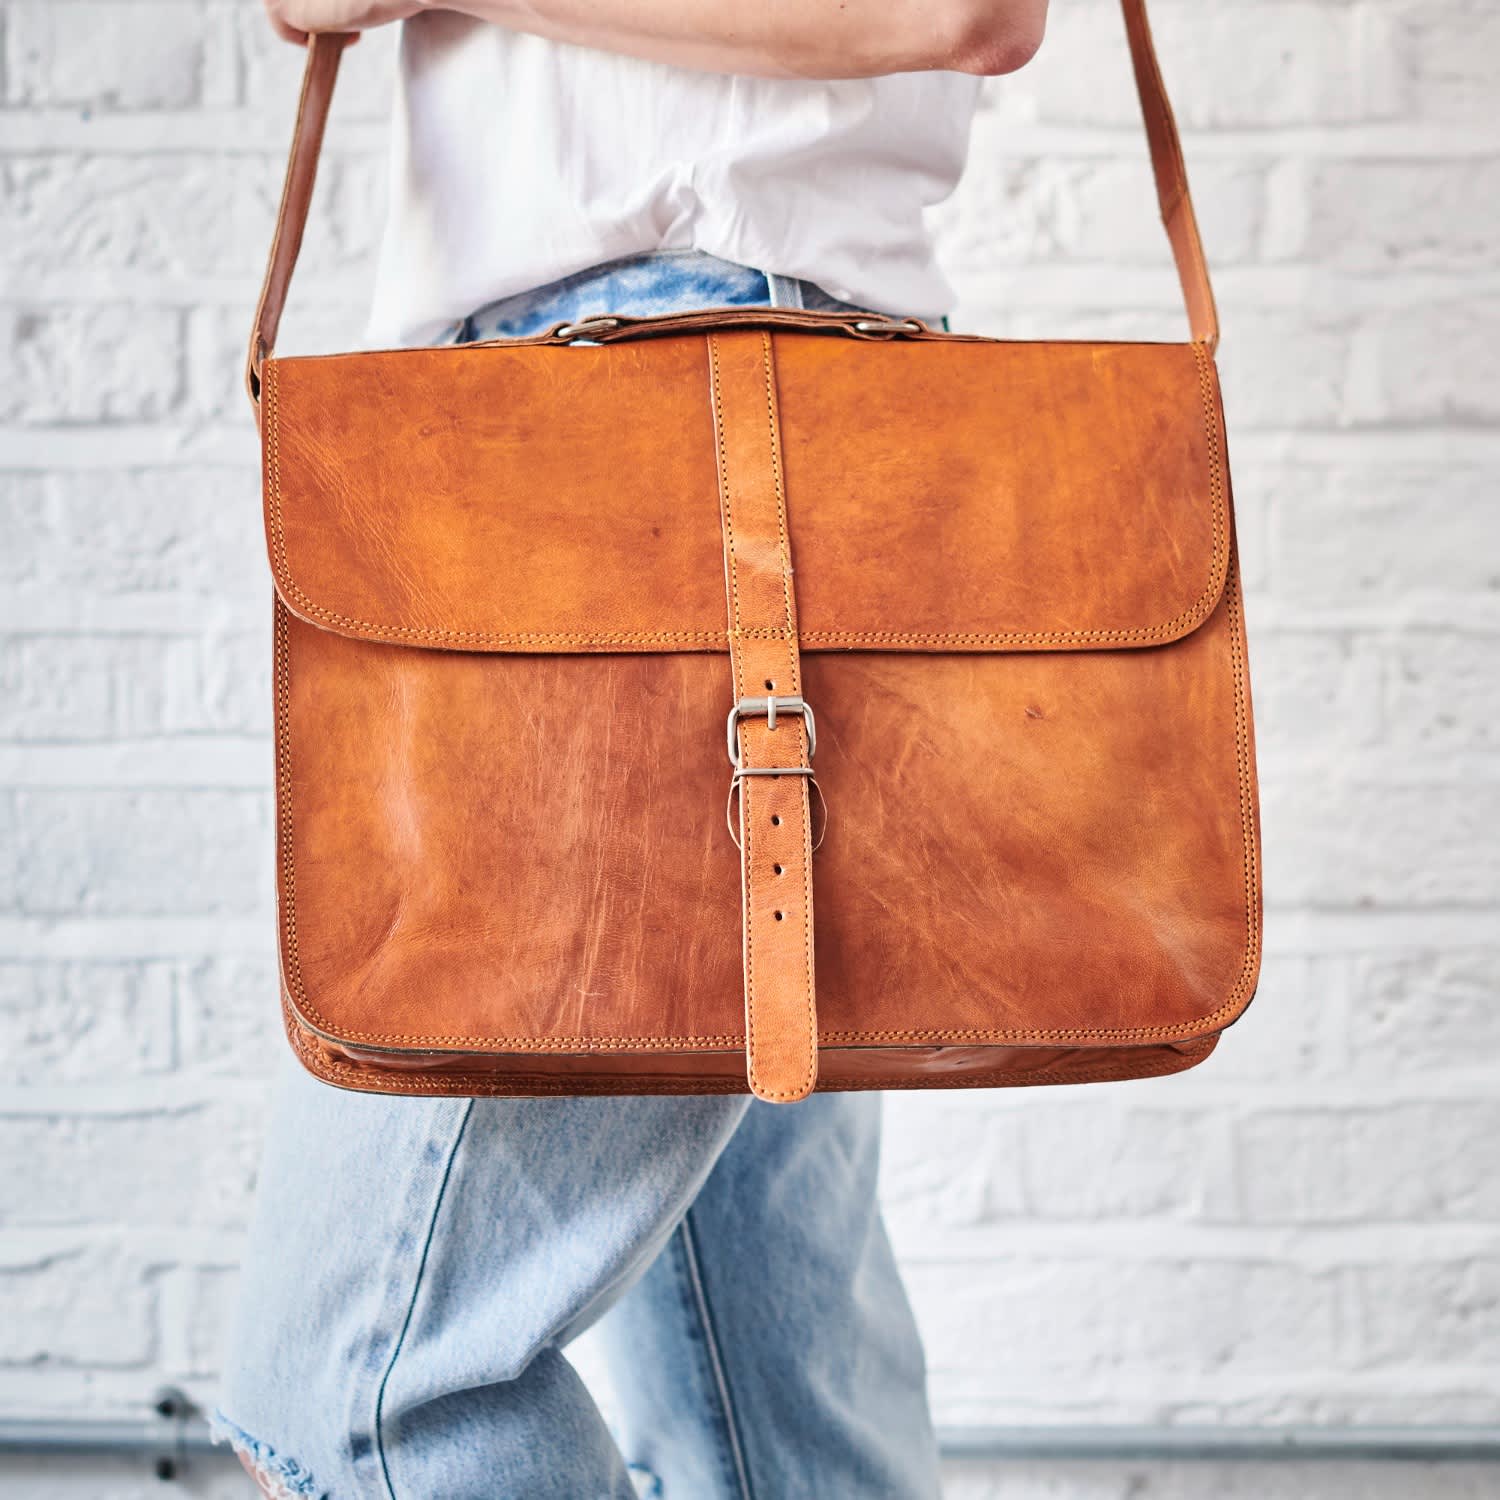 Maverick  The Original: leather bags with a vintage vibe